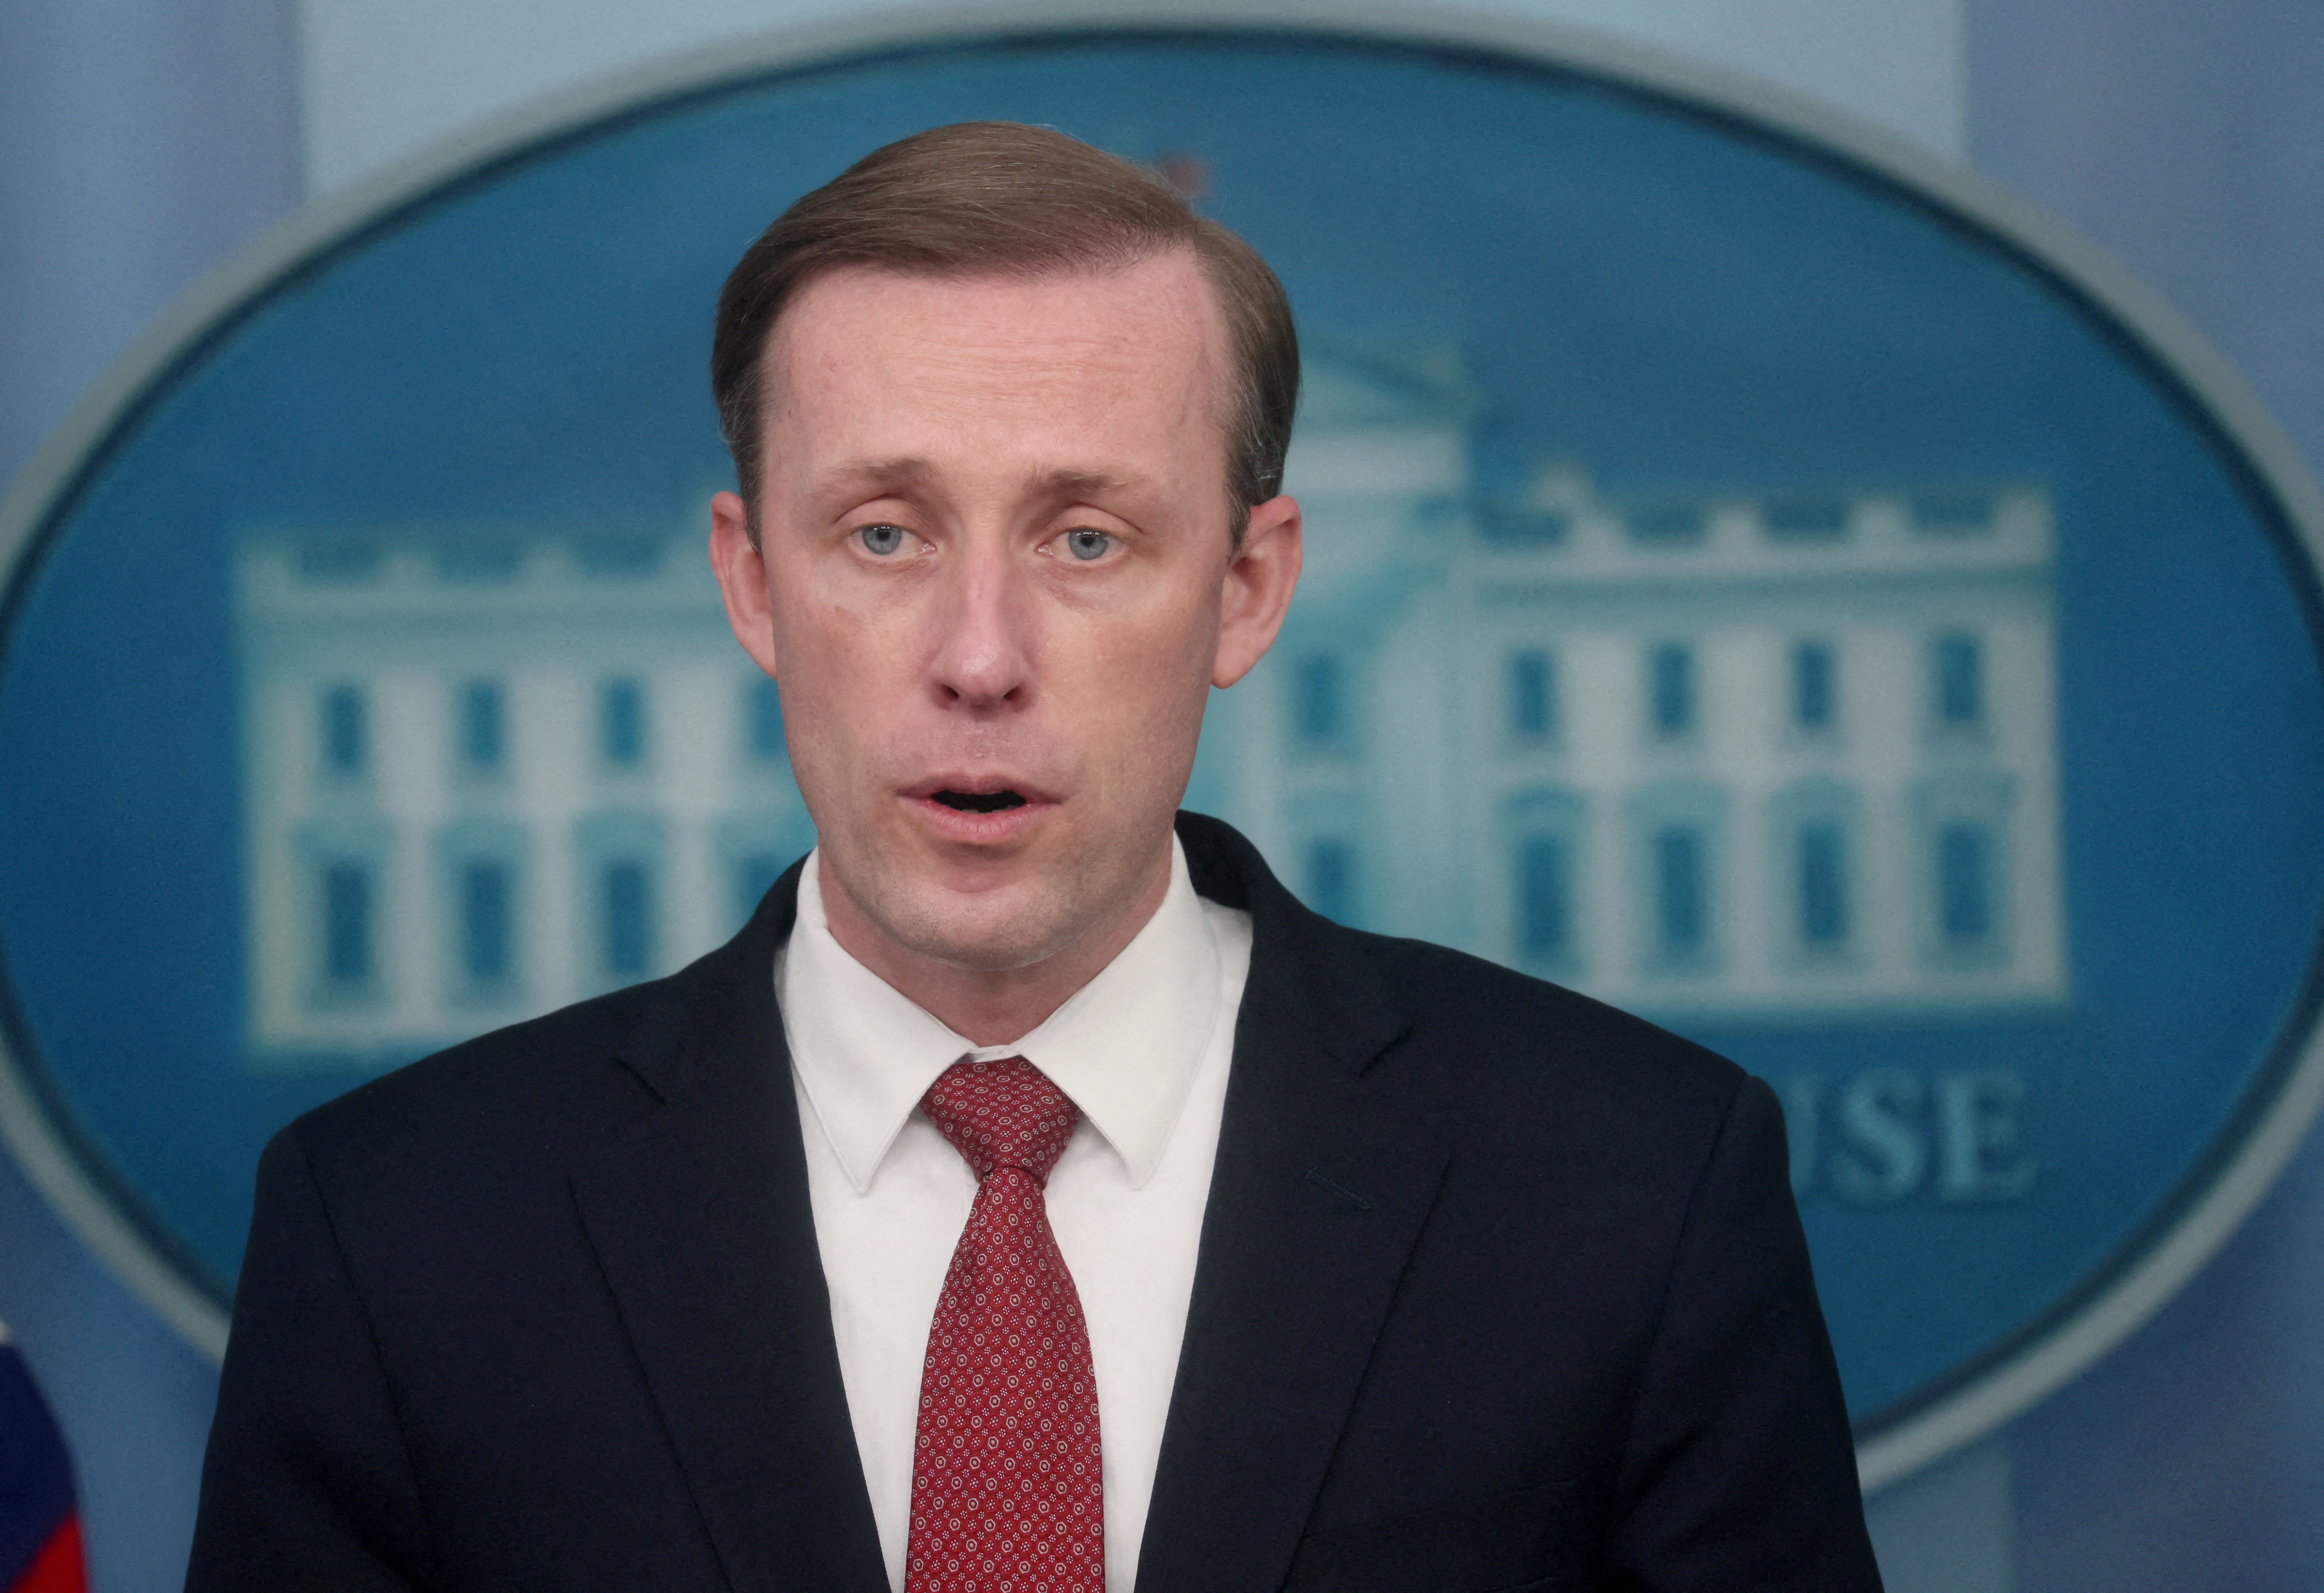 White House National Security Advisor Jake Sullivan speaks to the news media about the situation in Ukraine during a daily press briefing at the White House in Washington